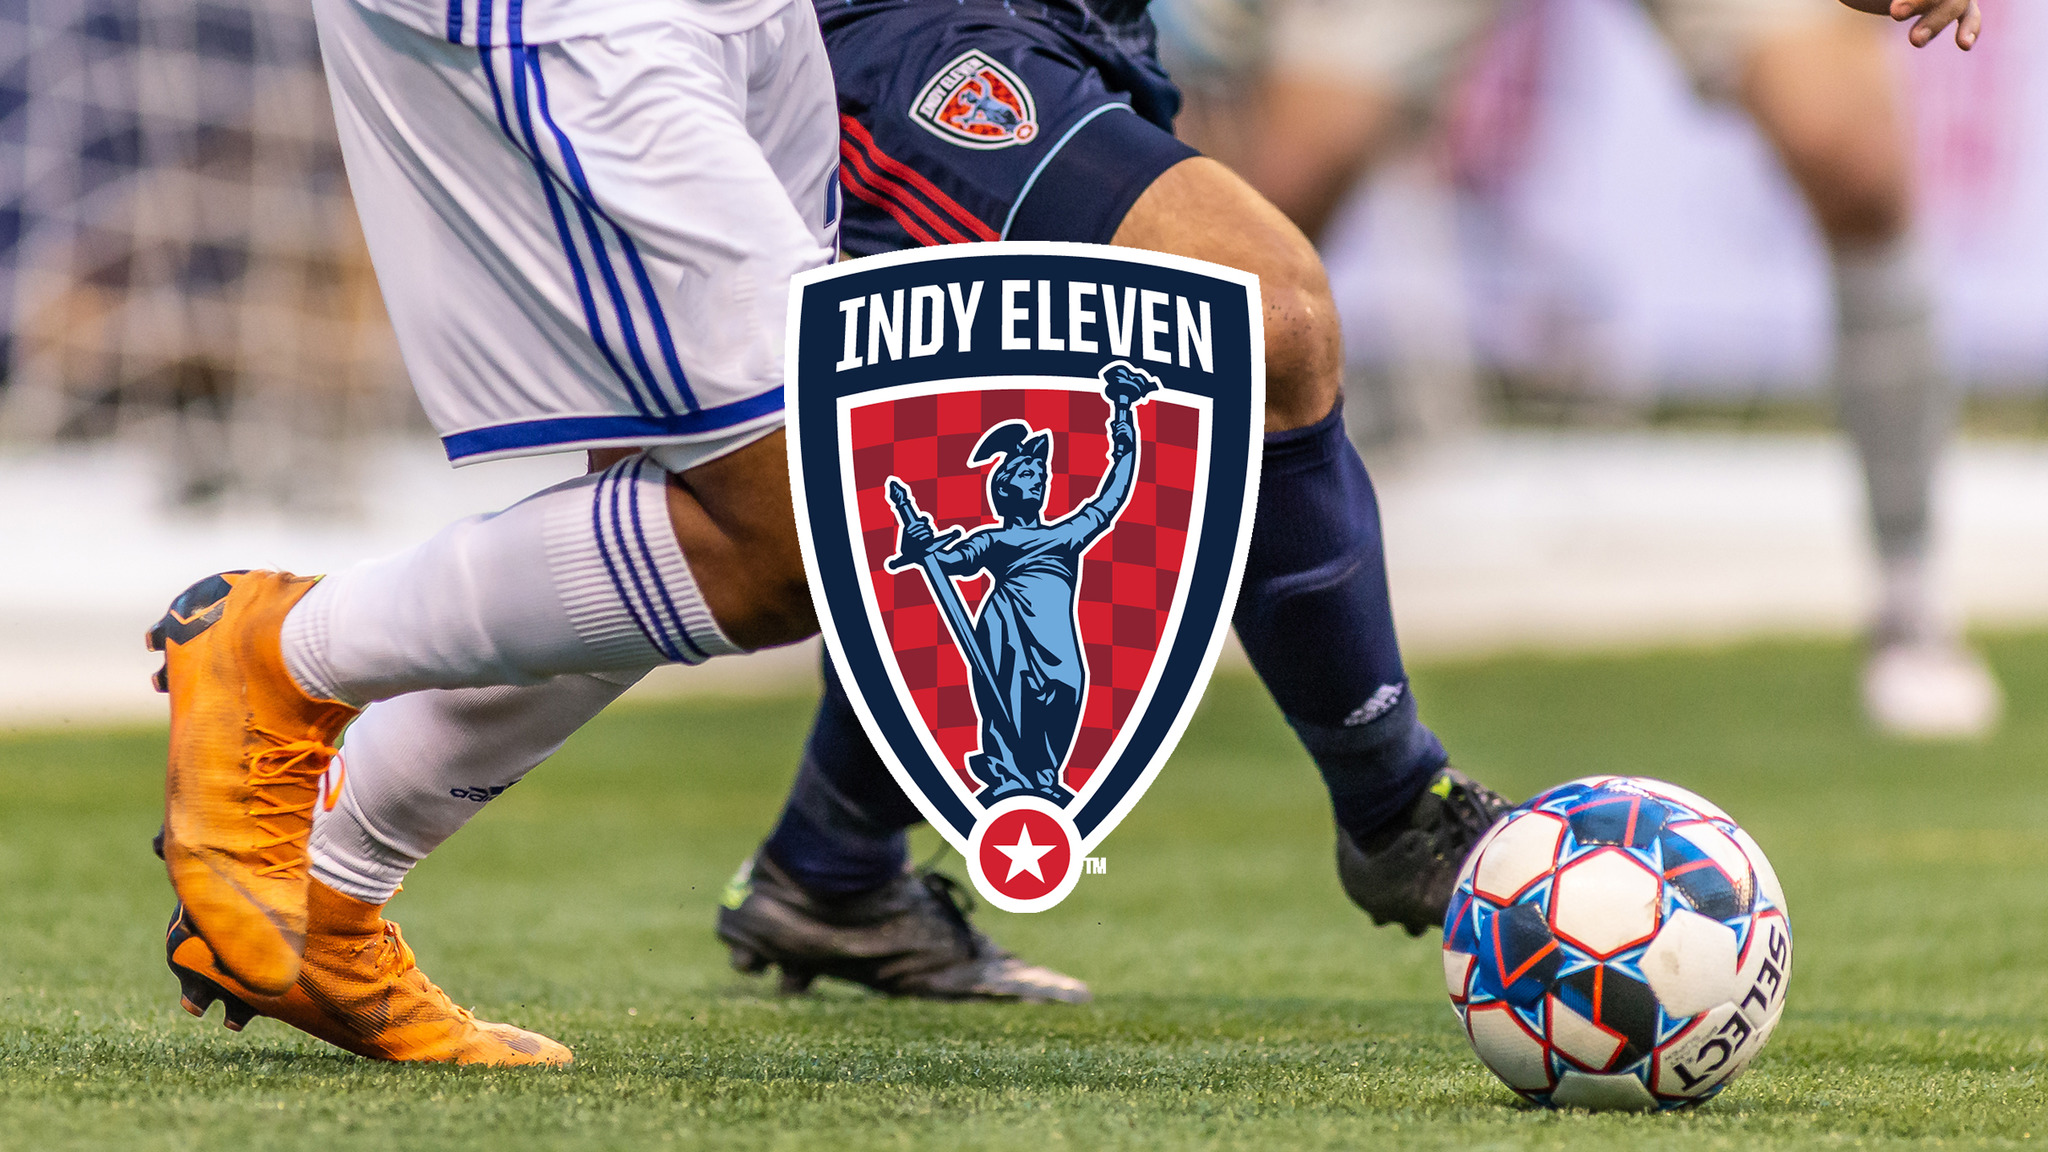 Indy Eleven Vs Pittsburgh Riverhounds Sc Indianapolis In Aarp